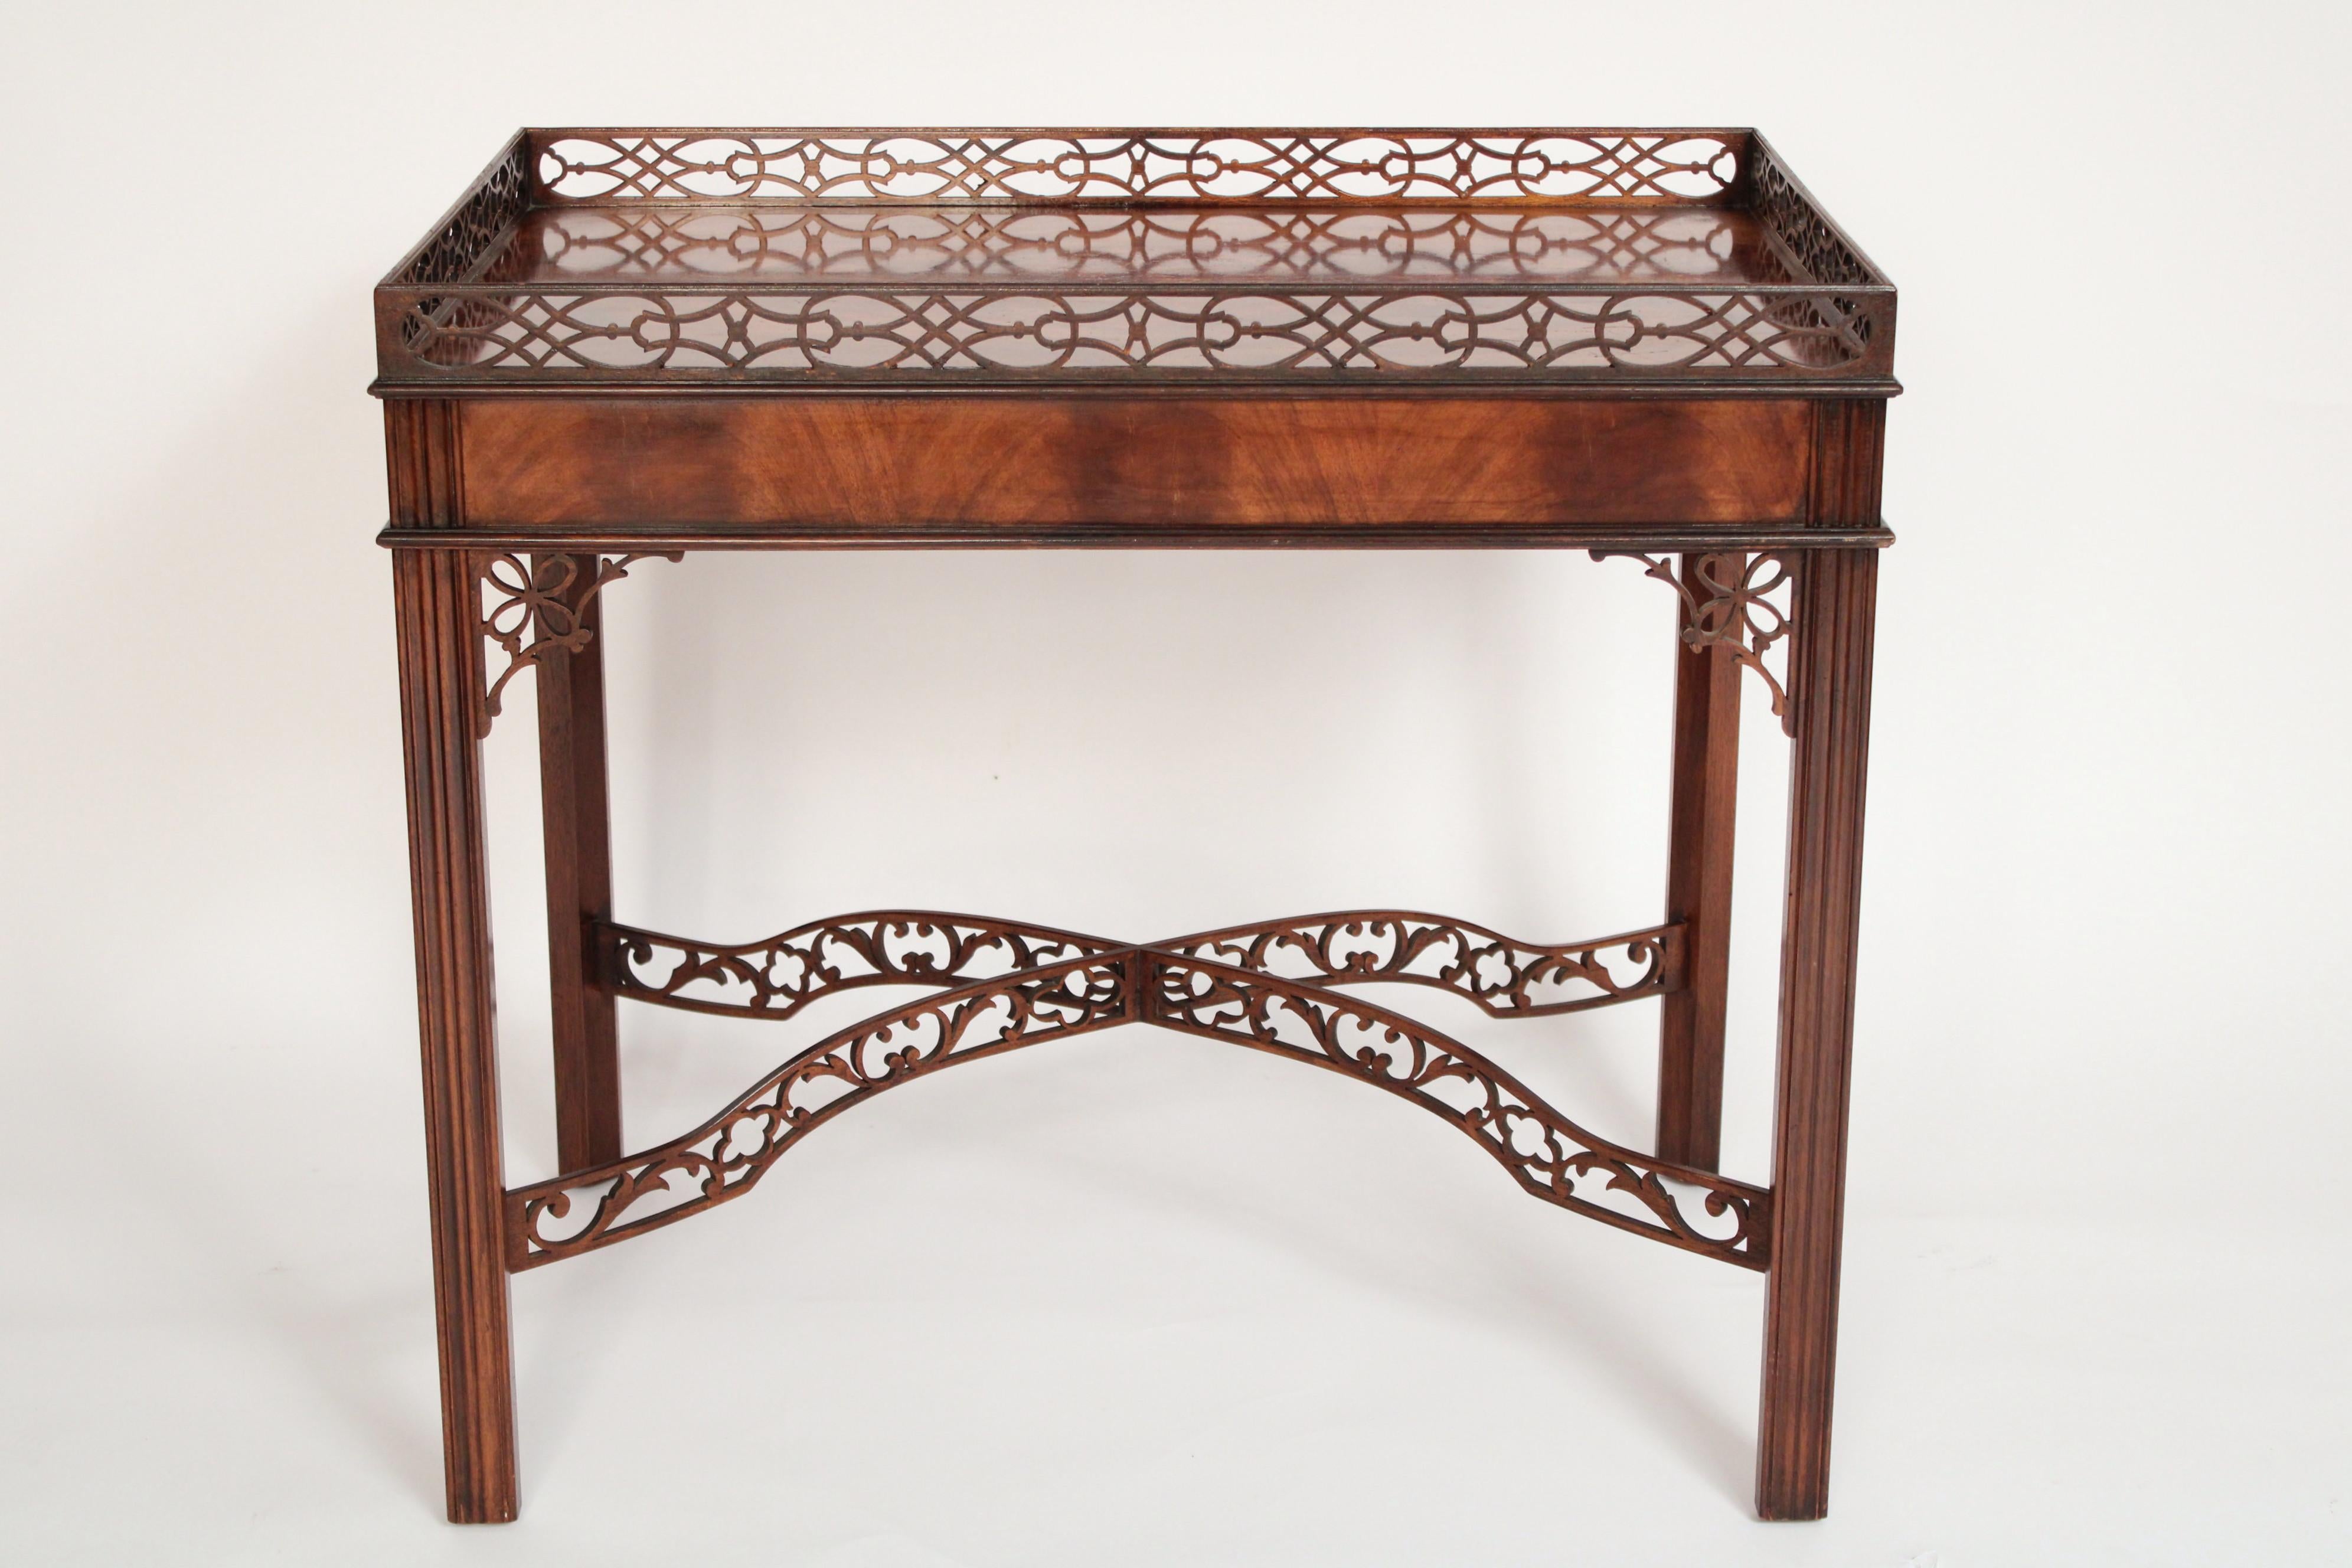 Pair of Chinese  Chippendale style mahogany end tables made by Baker Furniture Company, circa 1980's. With reticulated mahogany gallery's surrounding flame mahogany tops, the frieze with candle pull outs on each end, reticulated mahogany corner